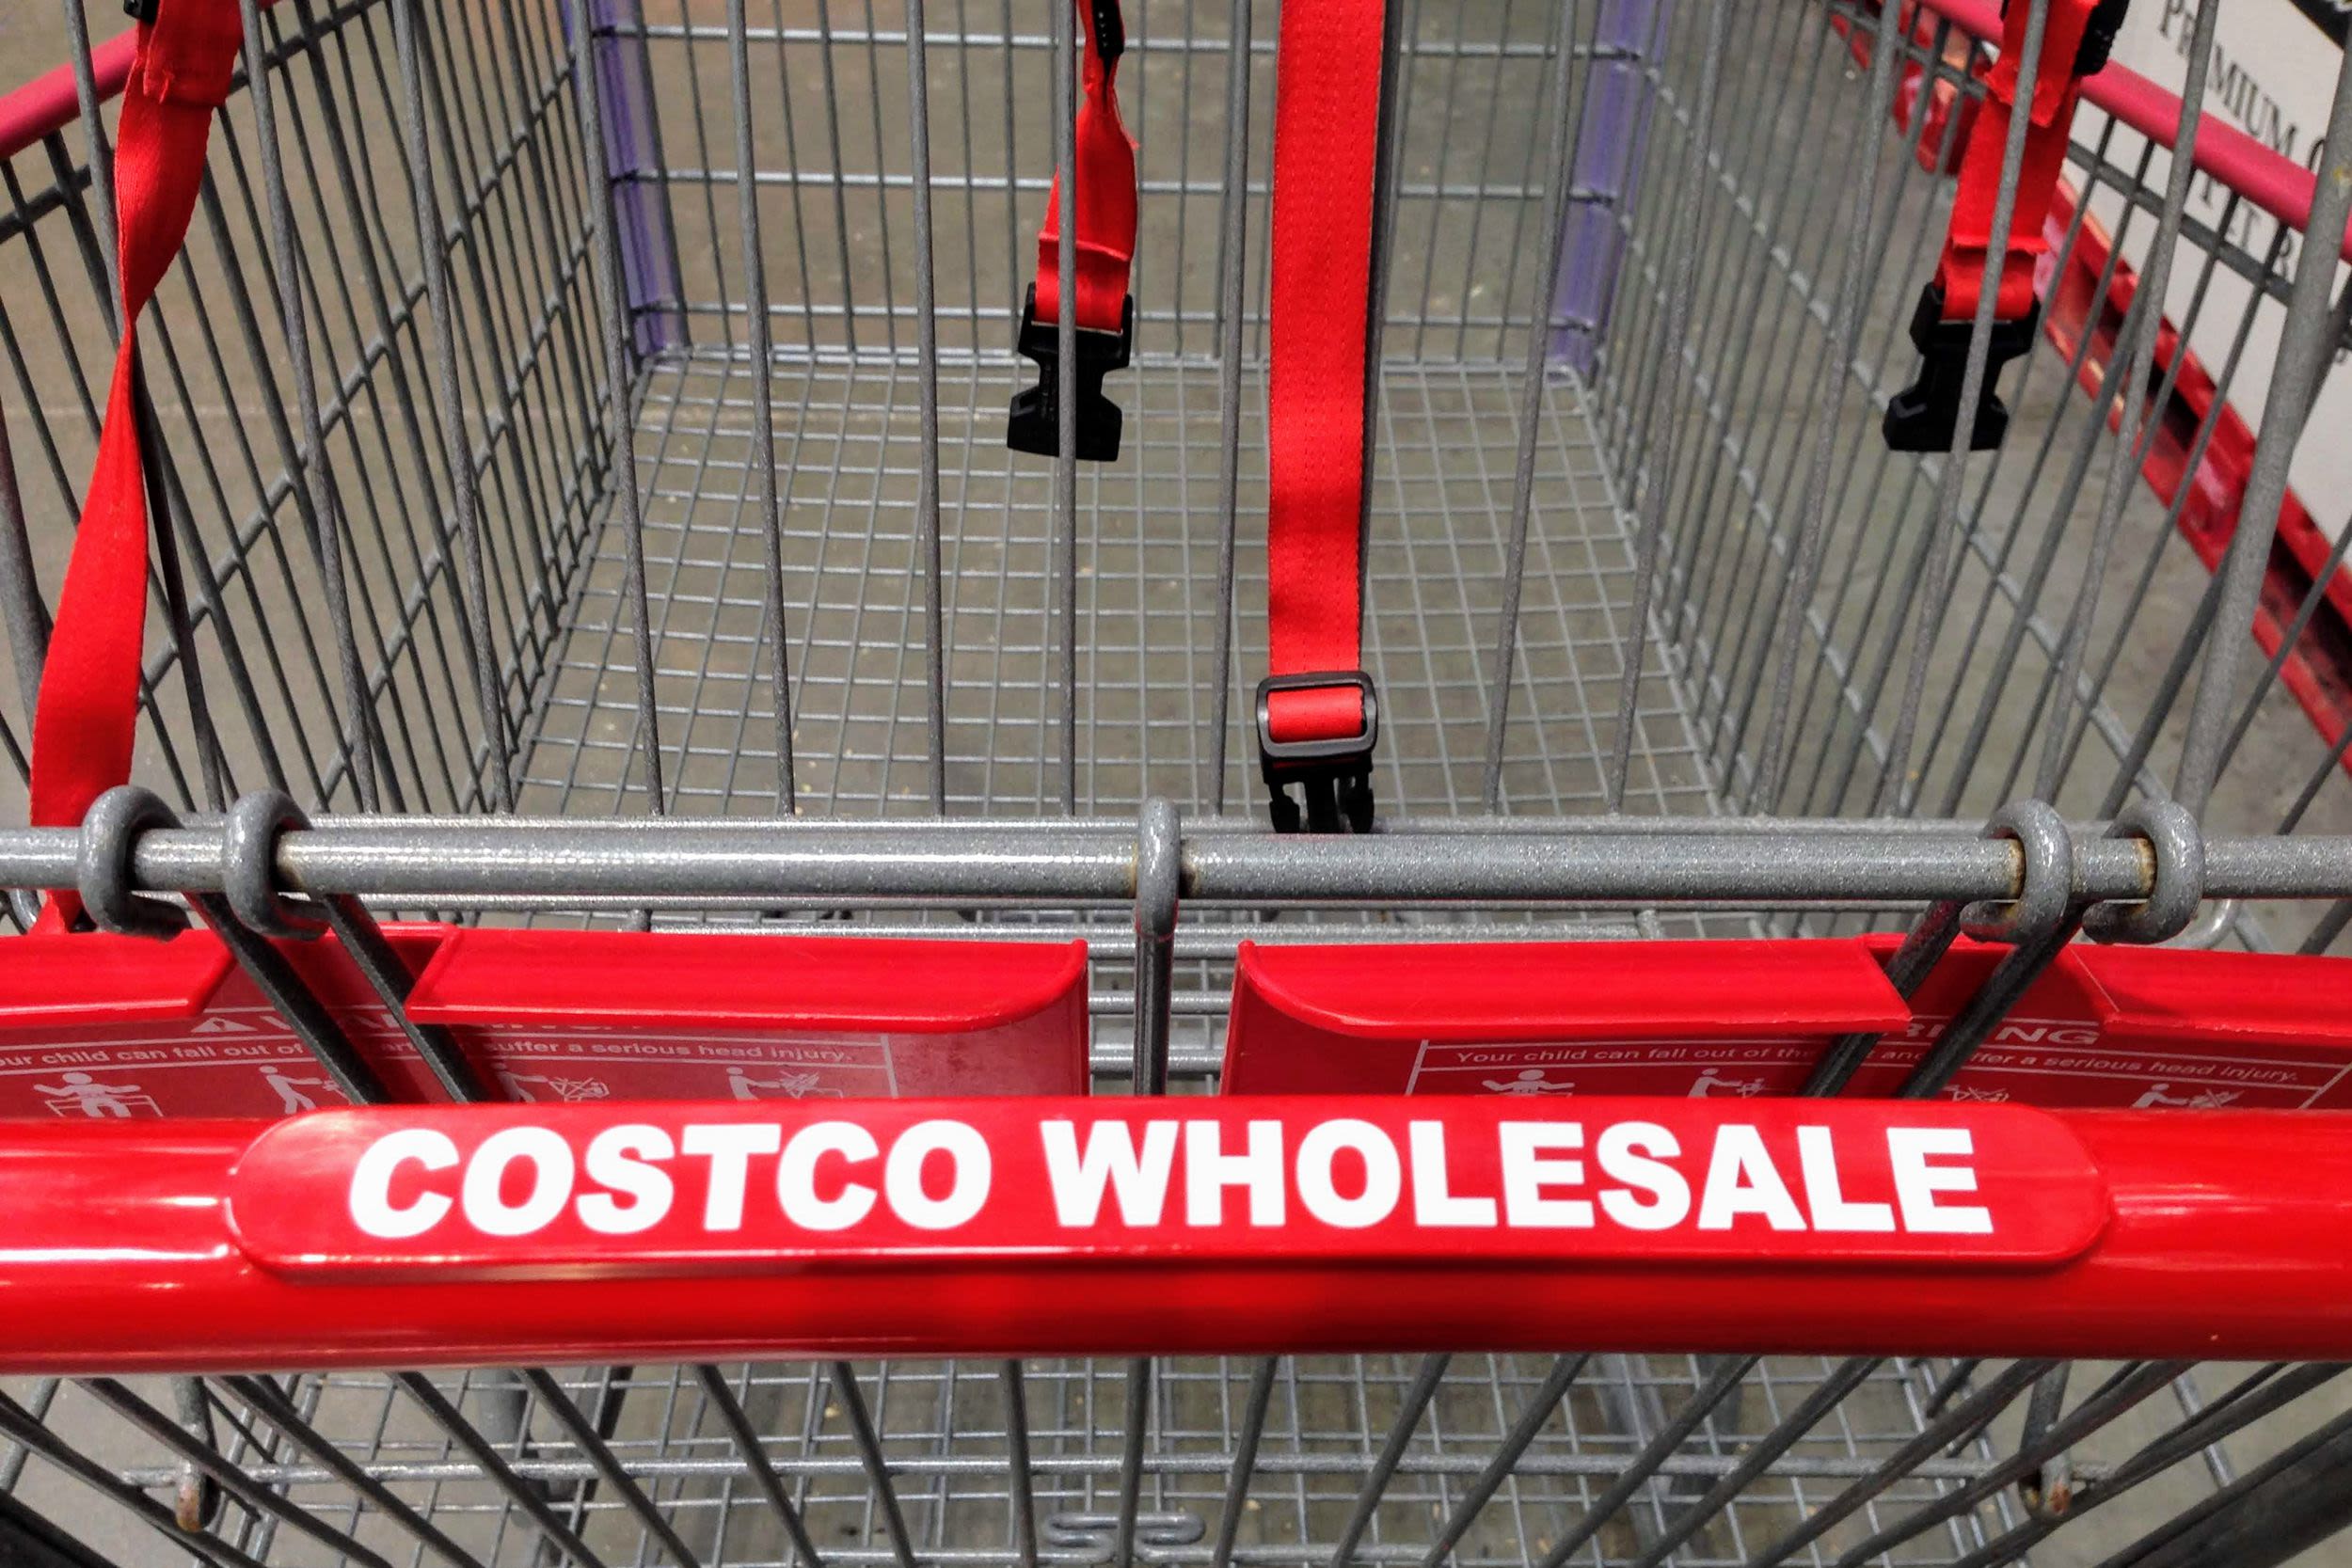 5 Alcohols You Should Always Buy from Costco (and 4 You Should Never)